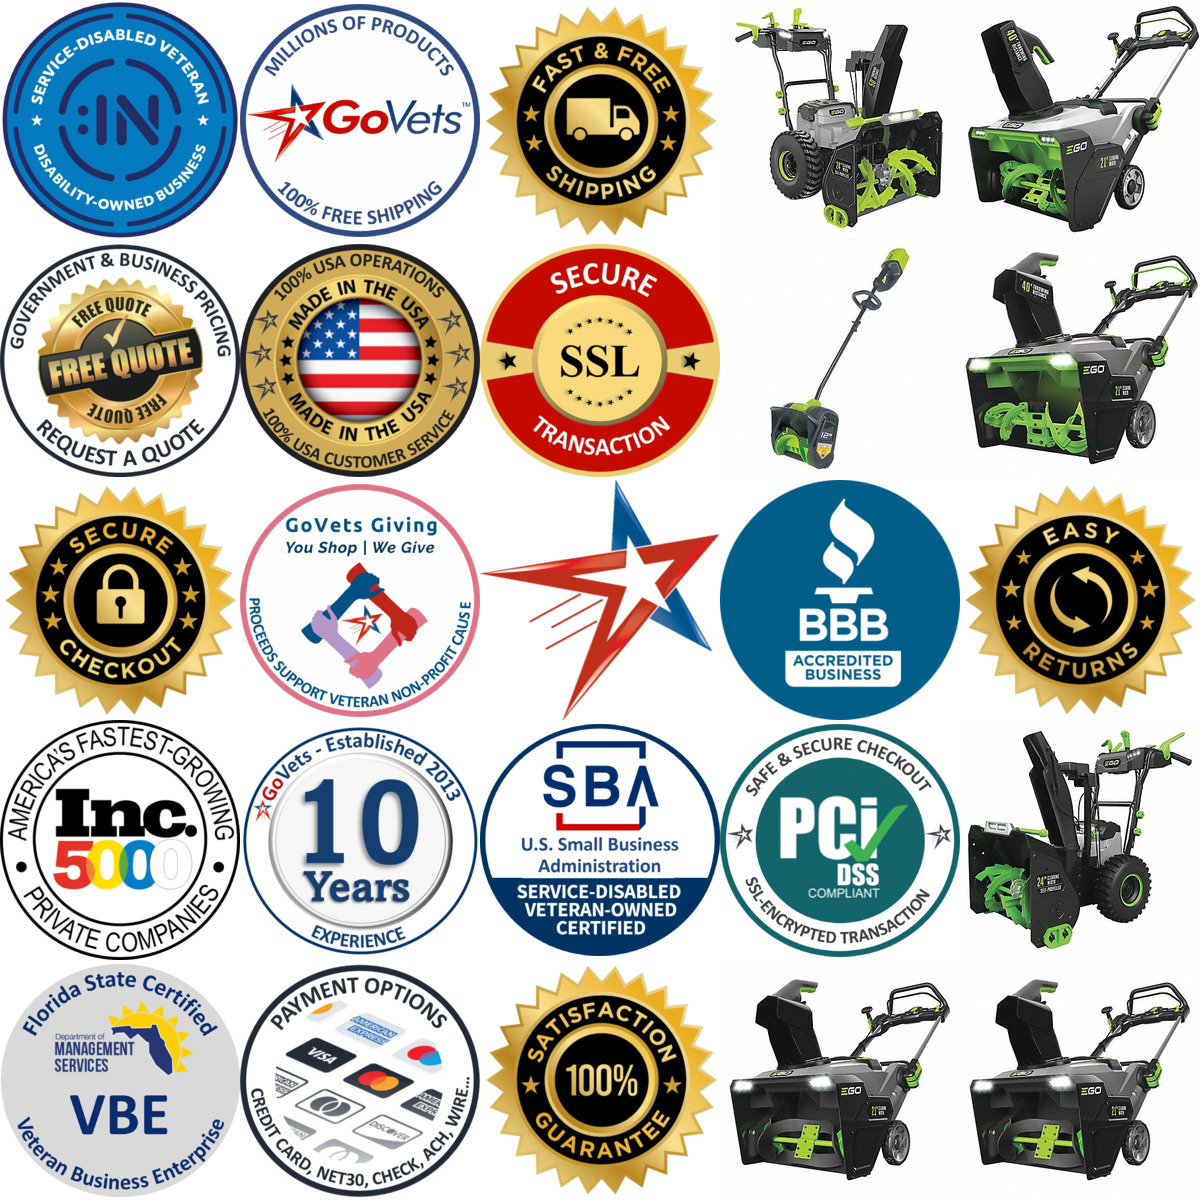 A selection of Electric Snow Blowers products on GoVets